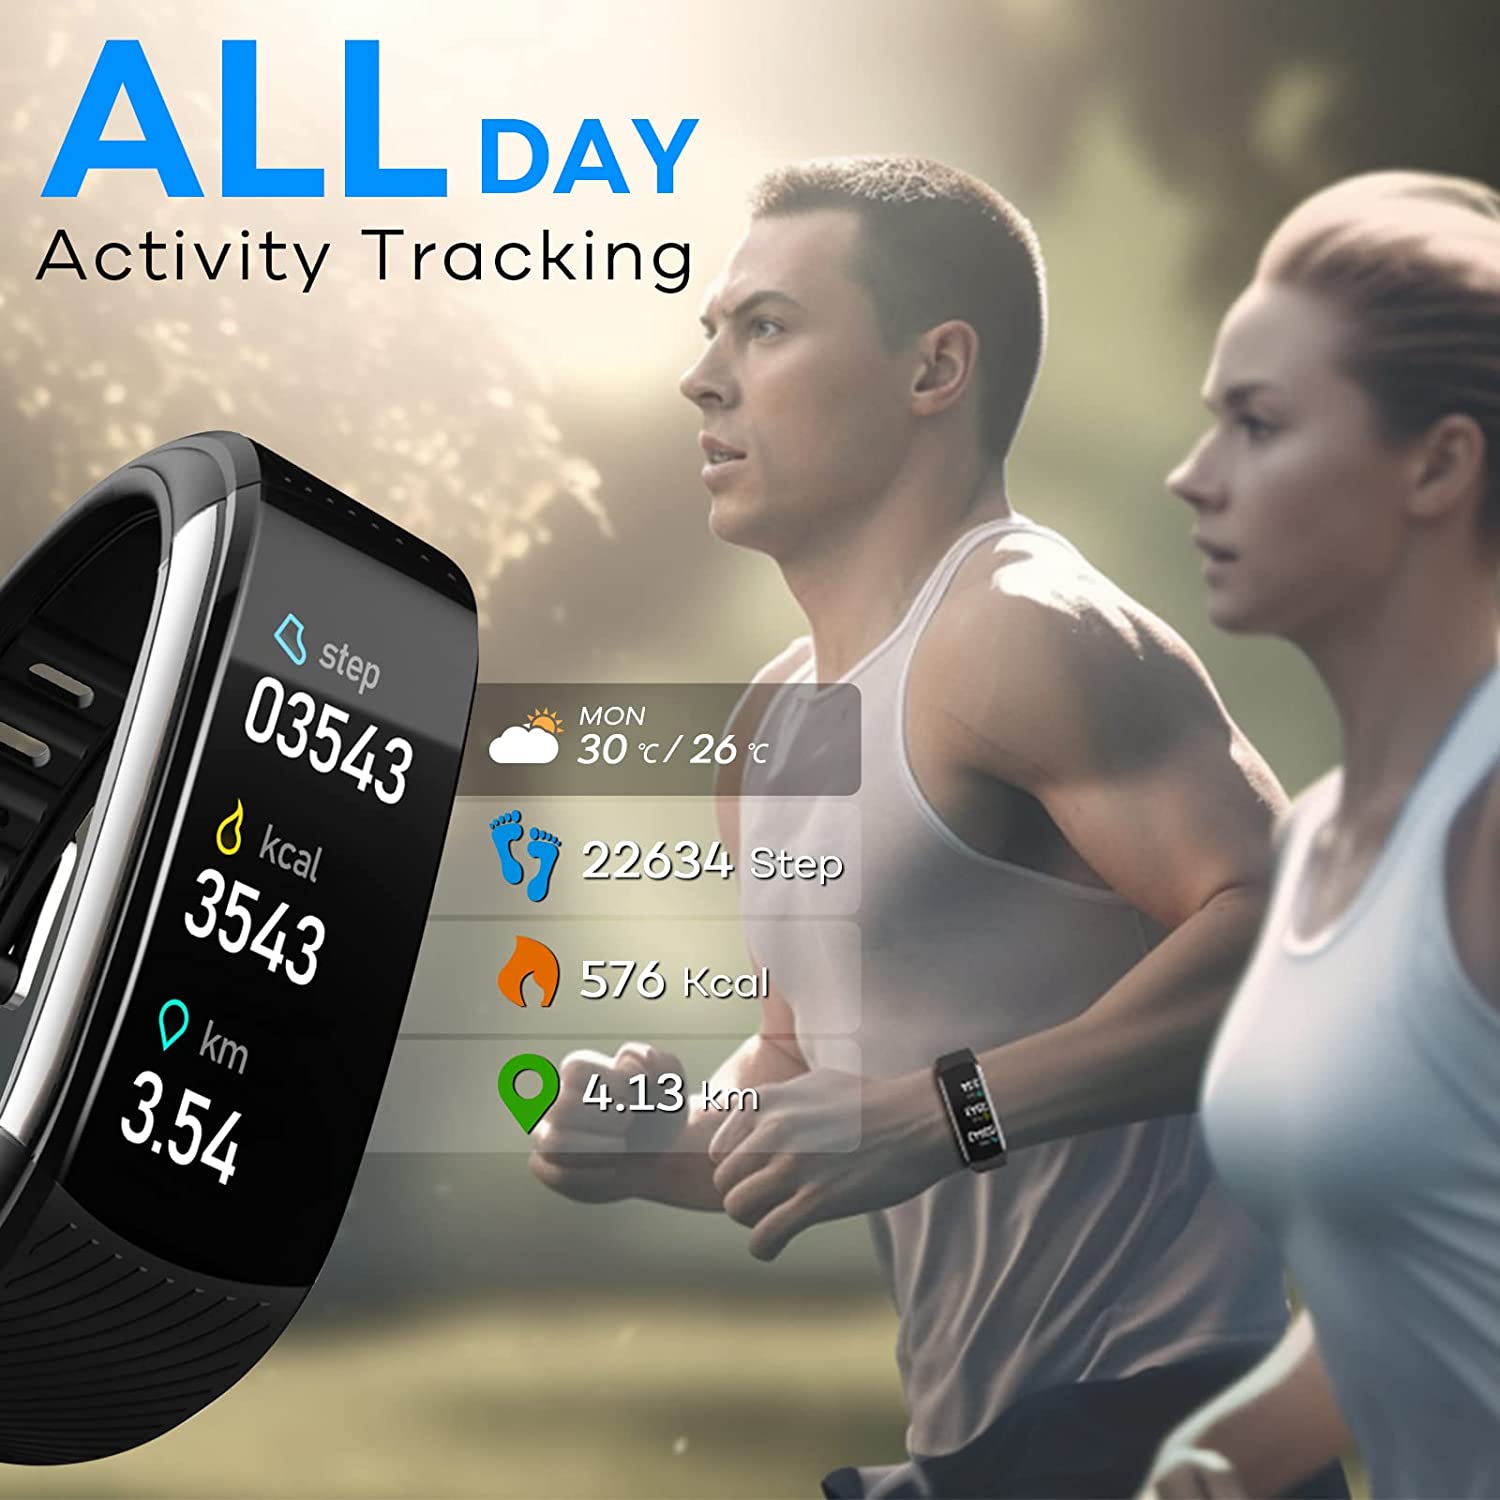 Fitness Tracker,Smart Watch with Heart Rate Blood Pressure Body Temperature&Sleep Monitor IP67 Waterproof Fitness Watch Step Calorie Counter Pedometer Health Watch for Android iOS Phones Men Women